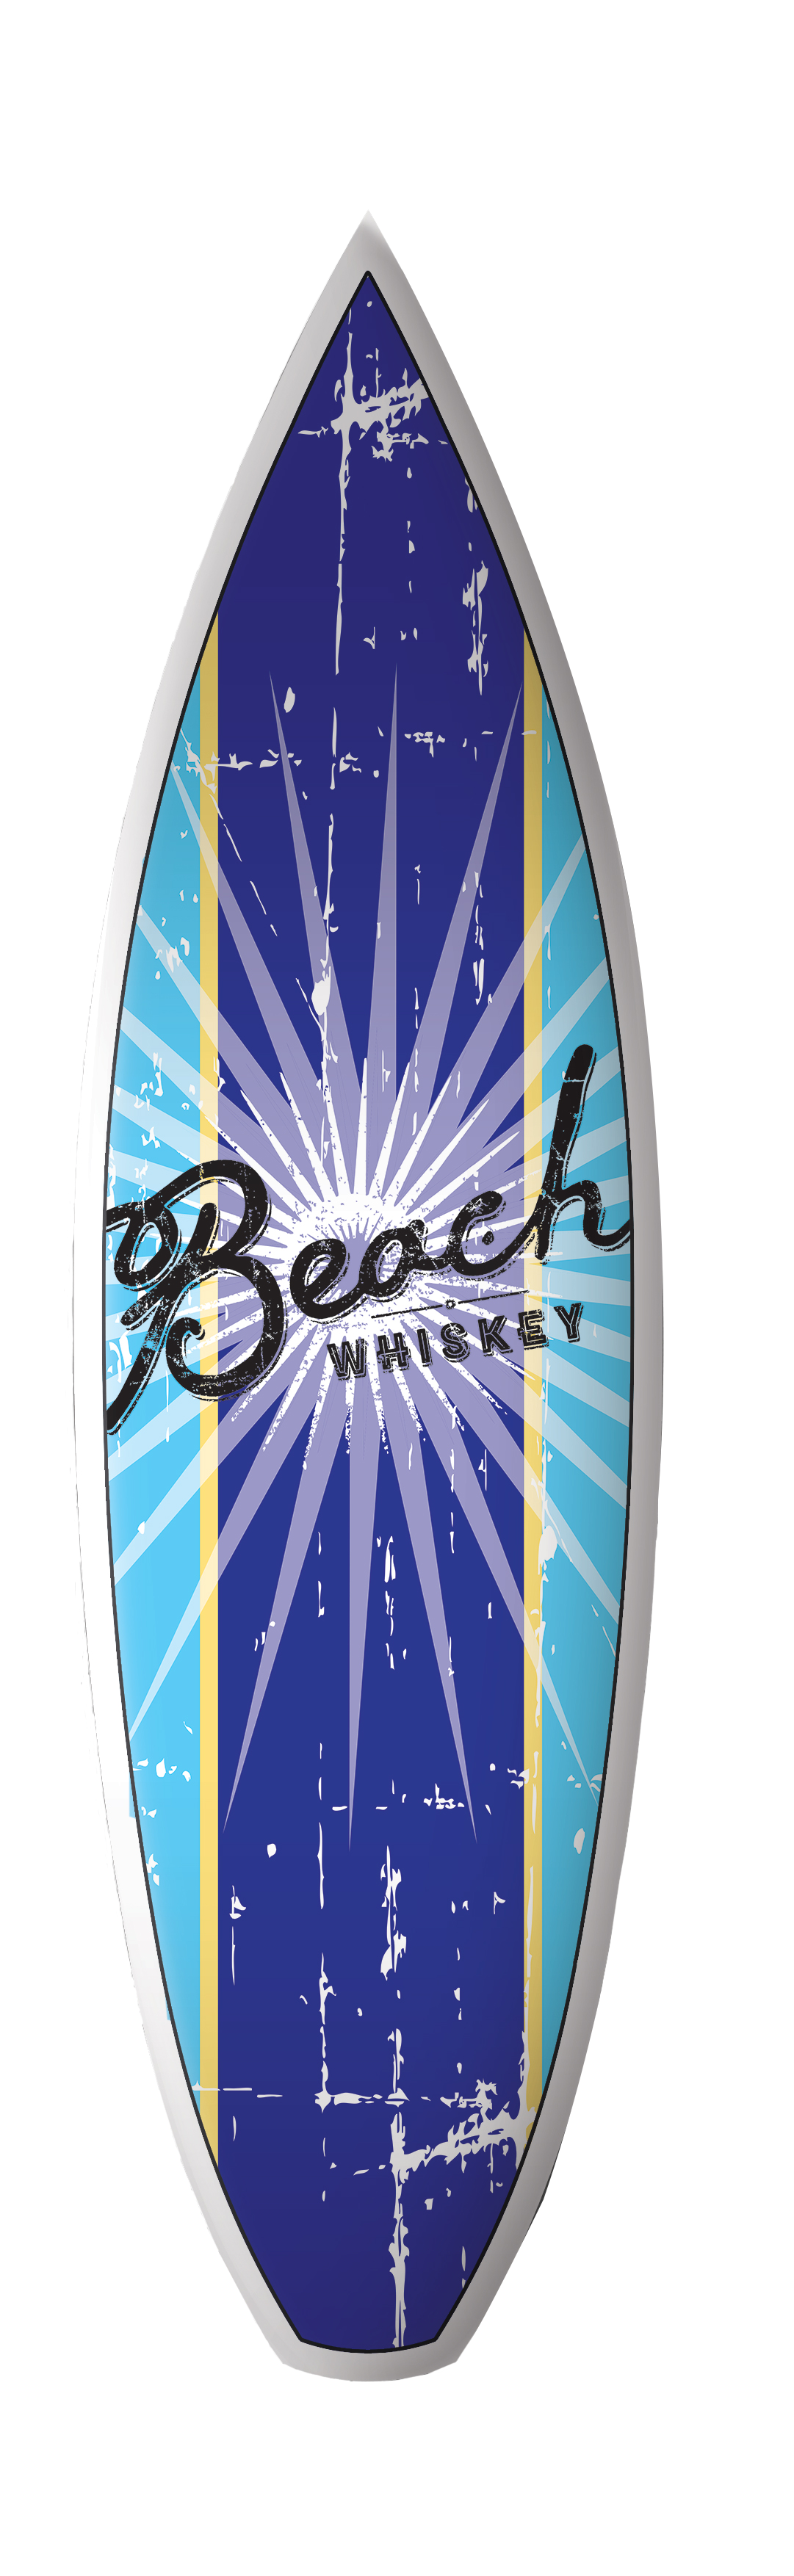 Beach-Whiskey--Surf.png